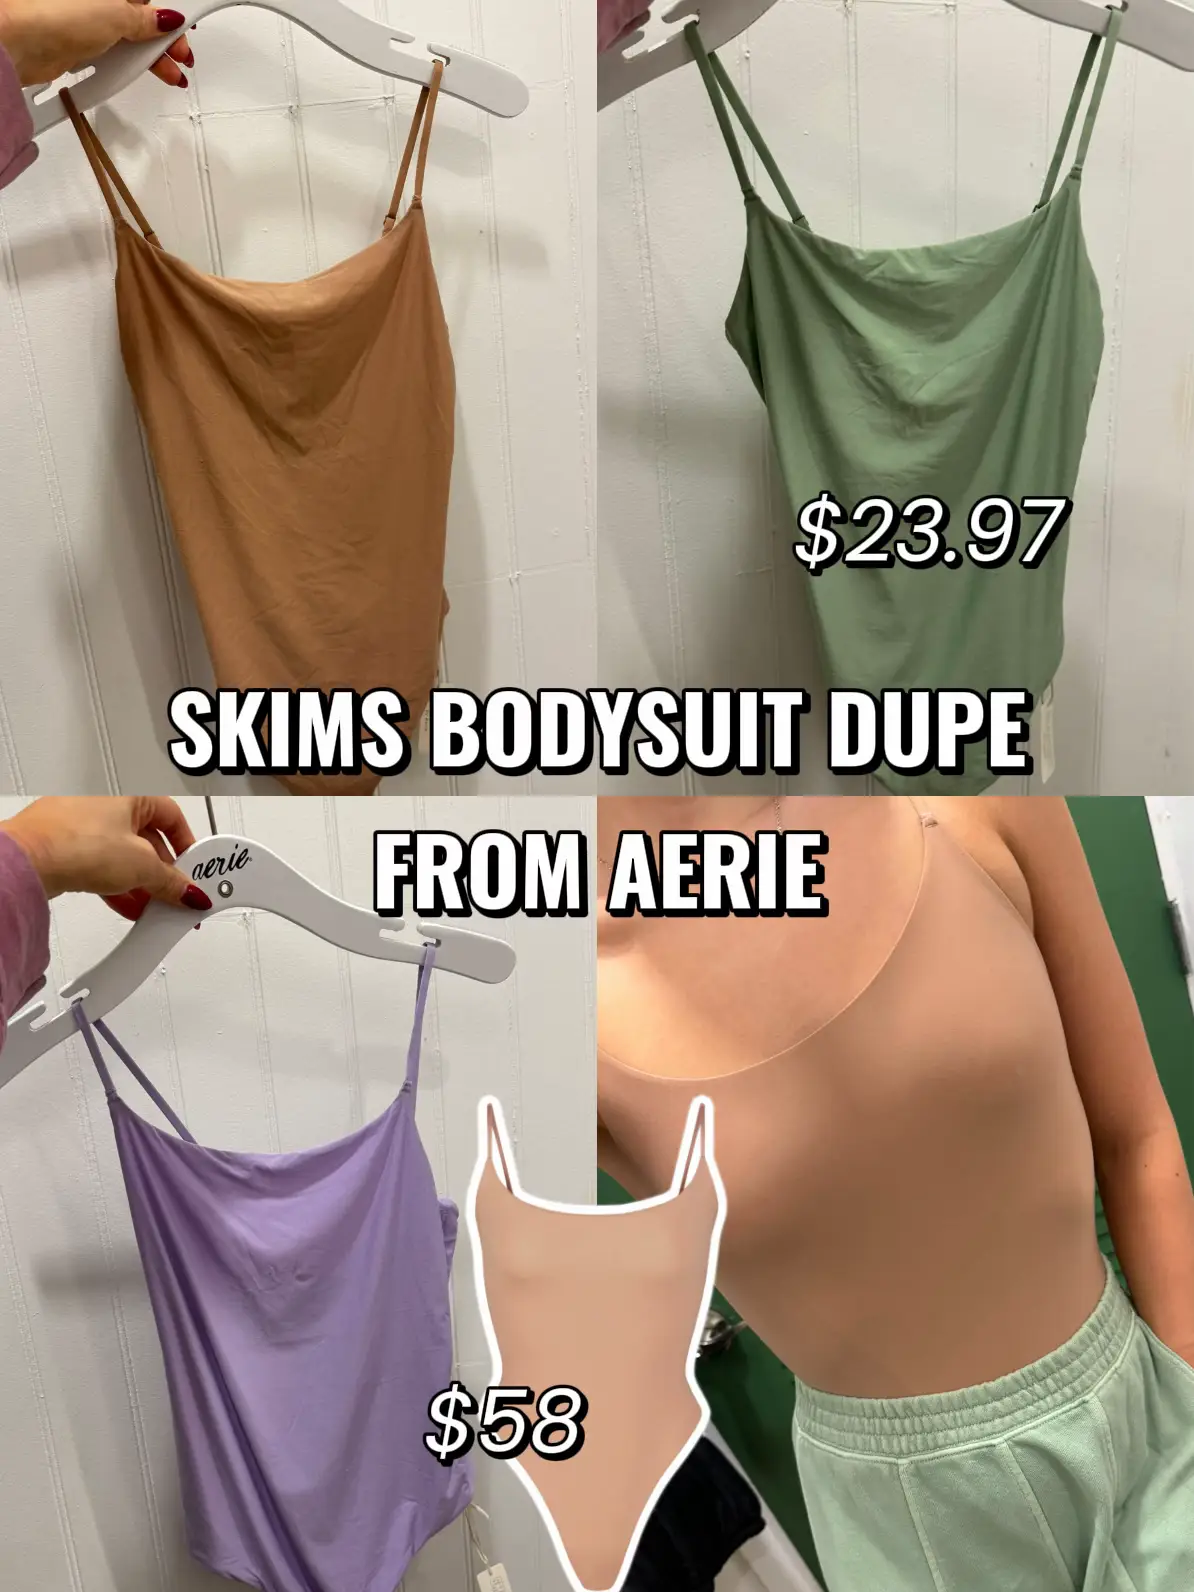 SKIMS SCULPTING BODYSUITS TRY ON🤎, Gallery posted by Valerie Escobar